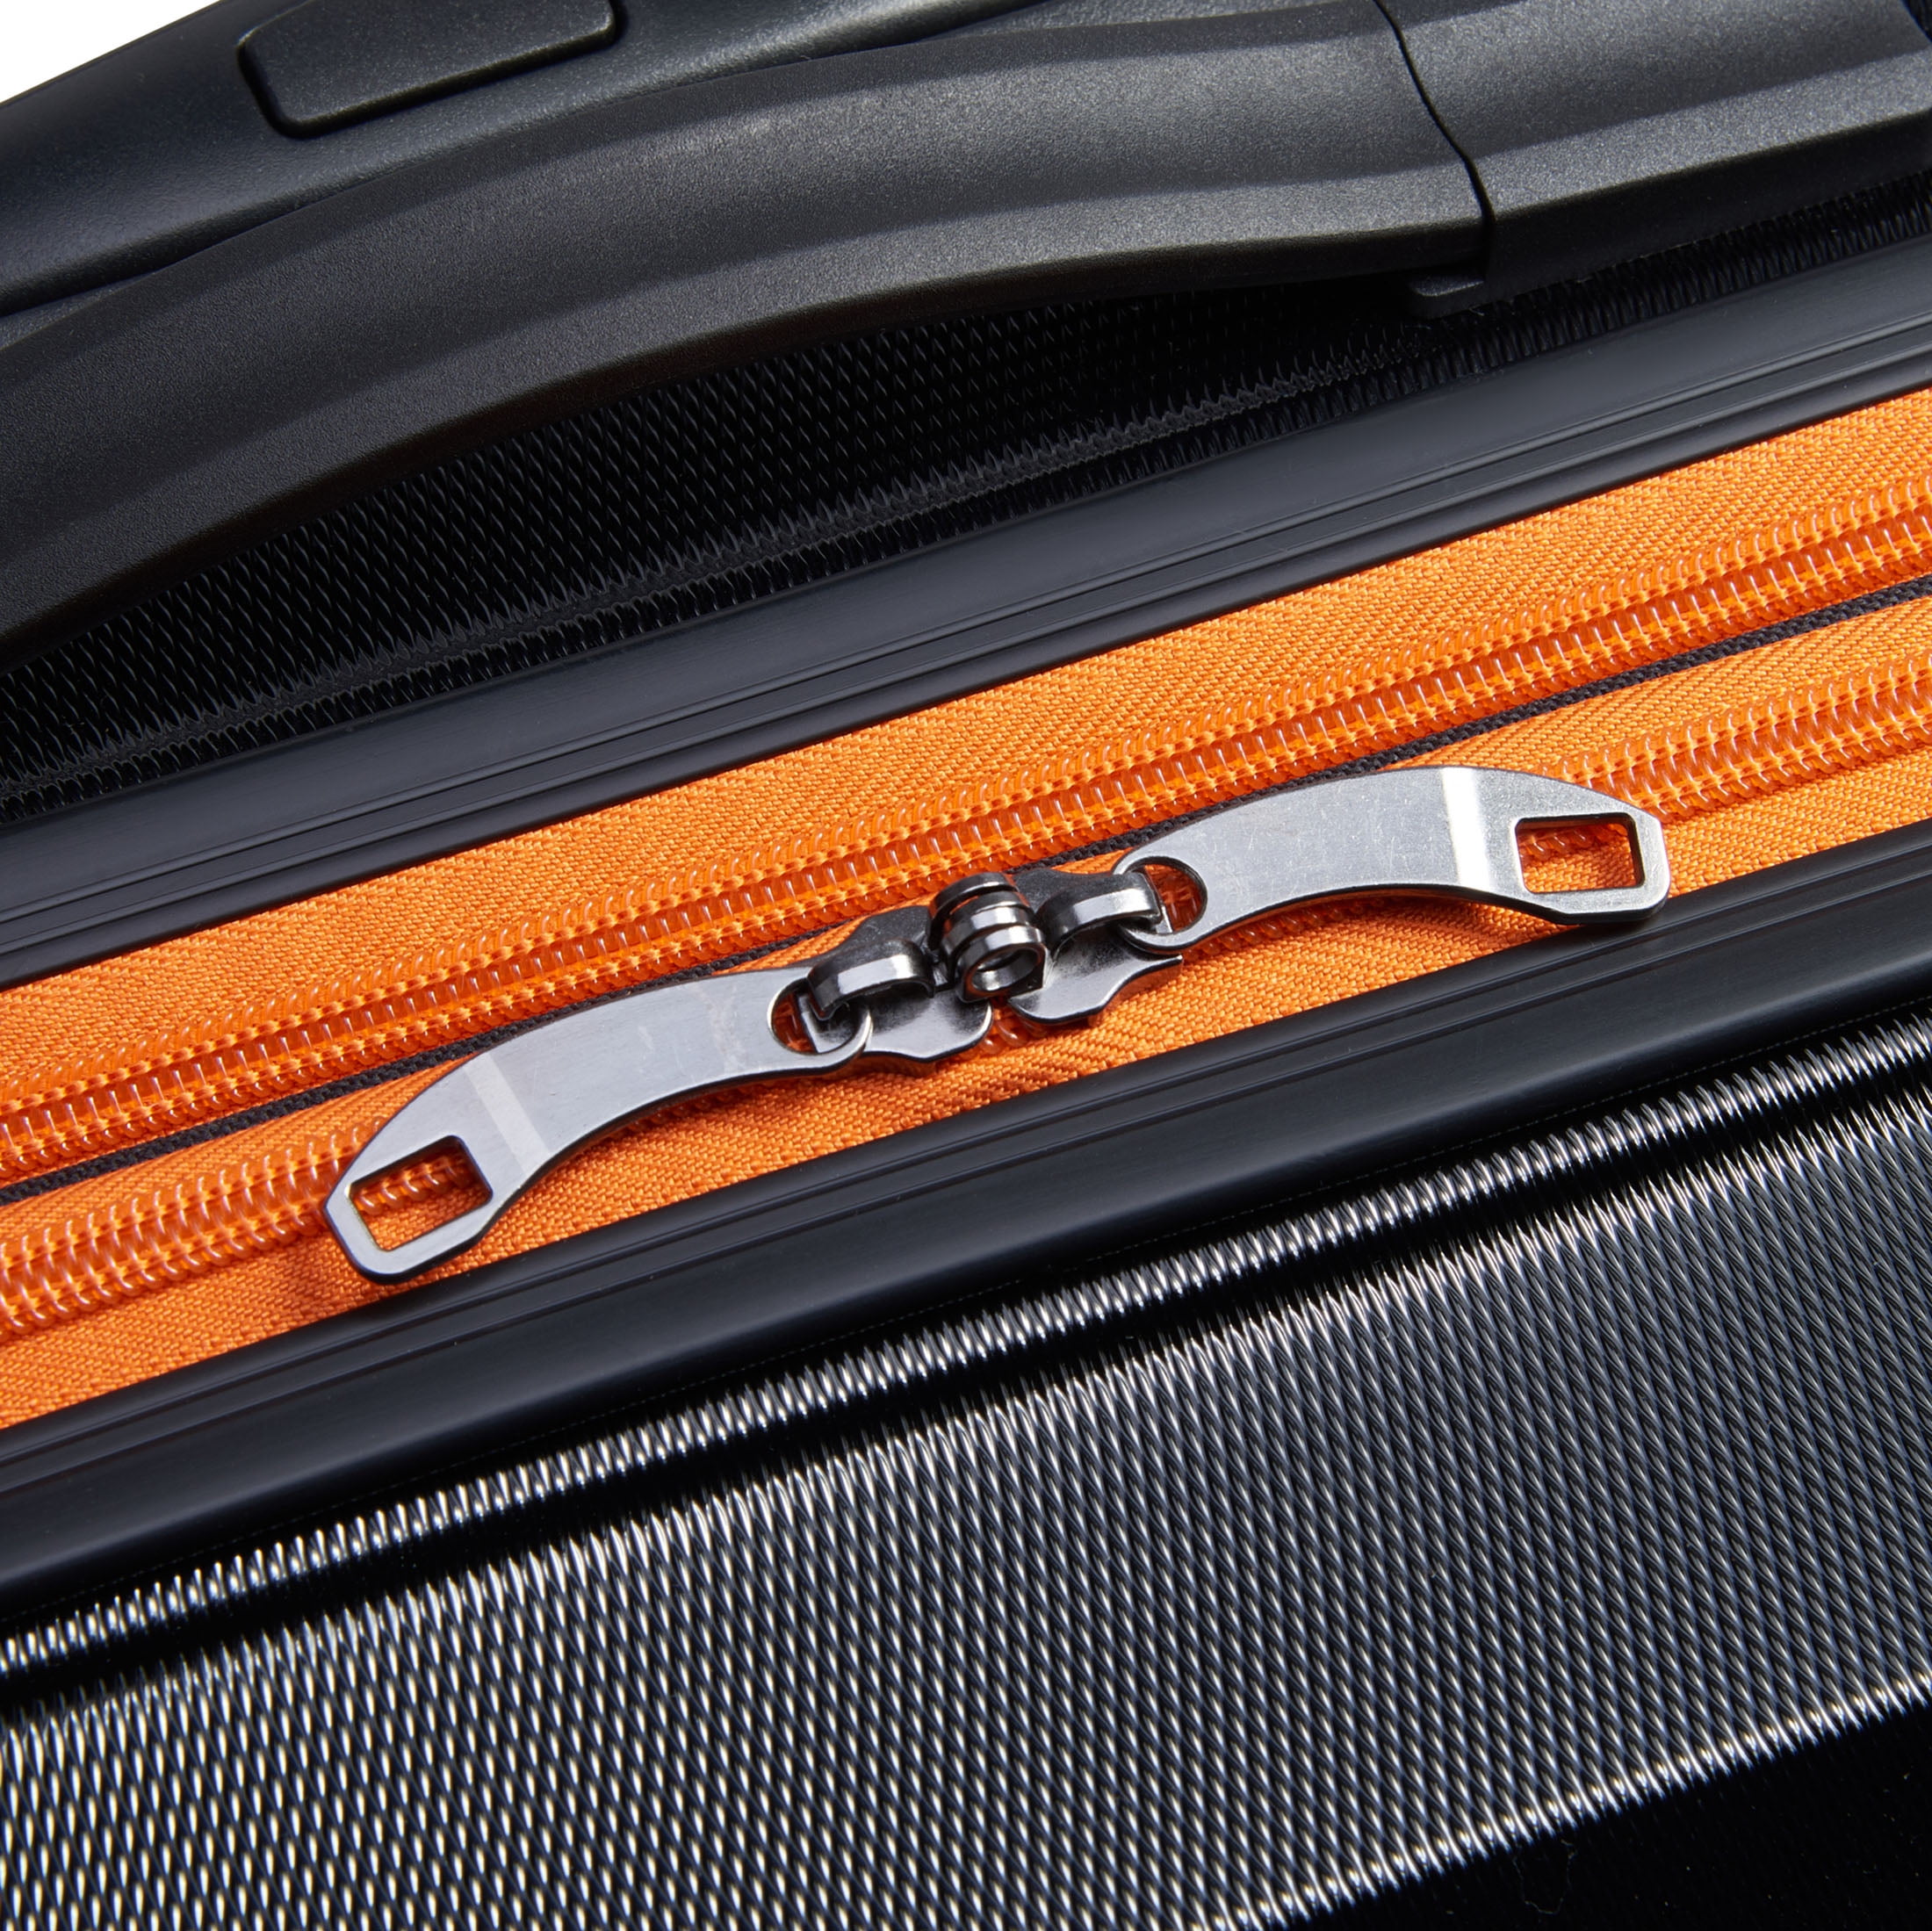 Shop Citadel Deluxe 20 and 24 Har – Luggage Factory